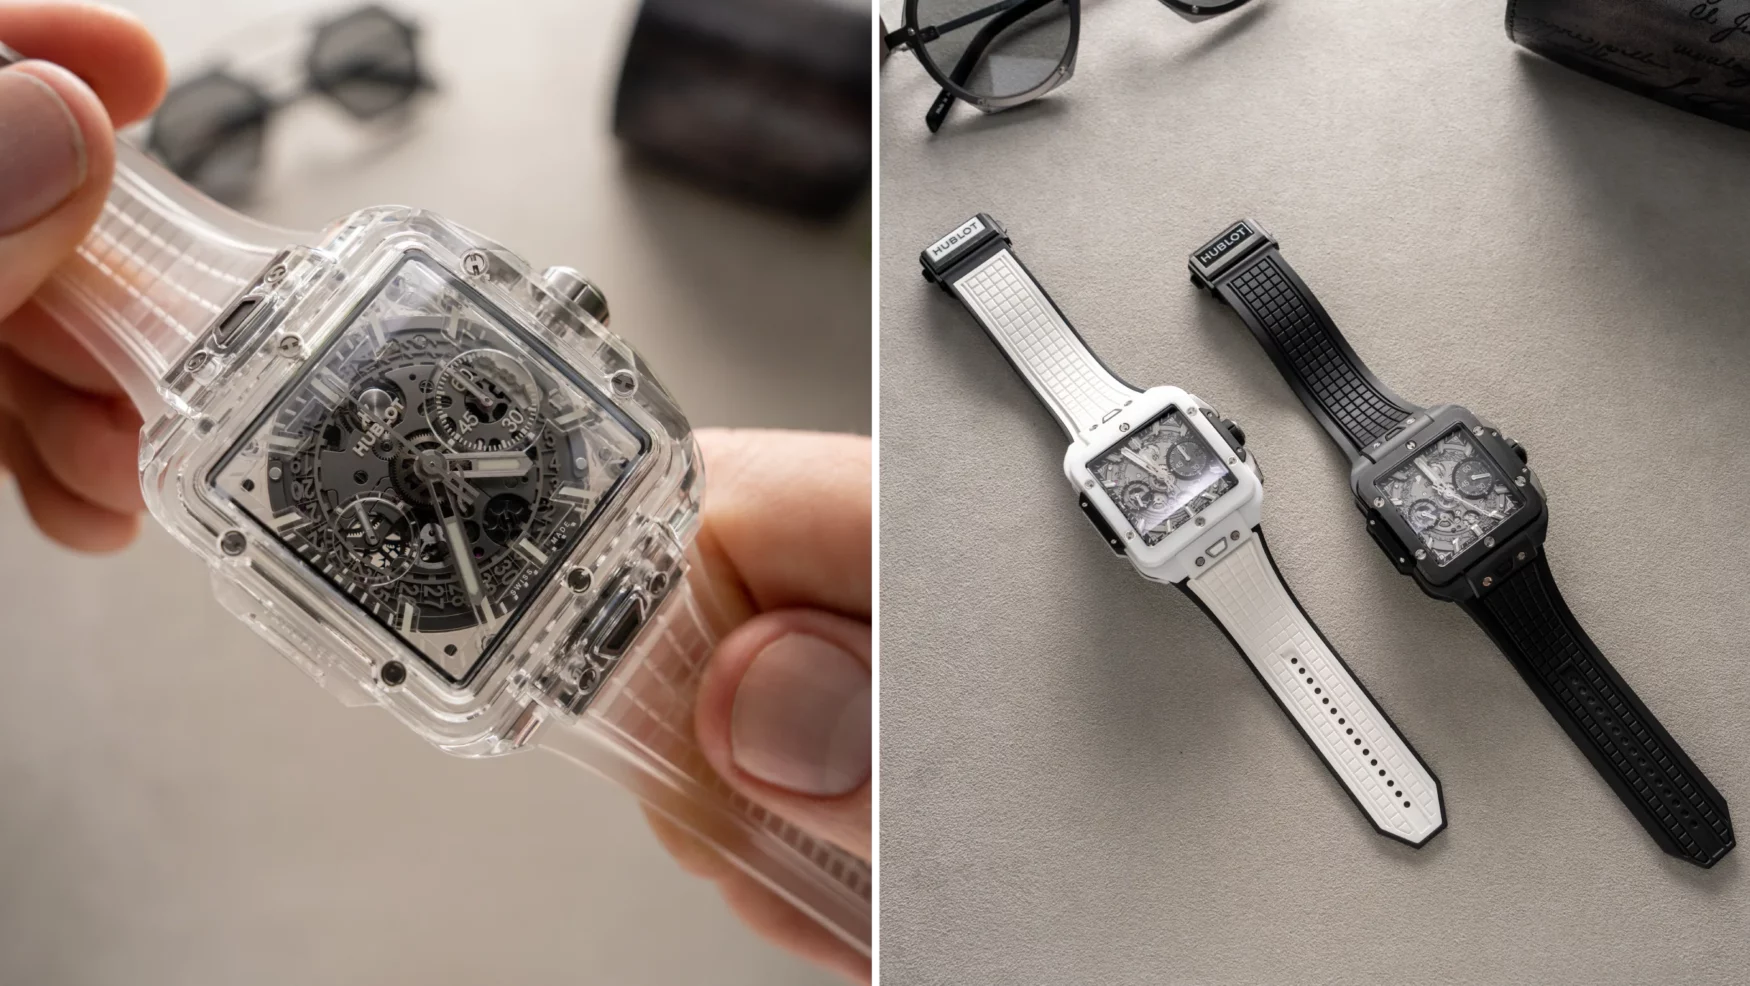 Three cool things about the Hublot Square Bang Ceramic and Sapphire